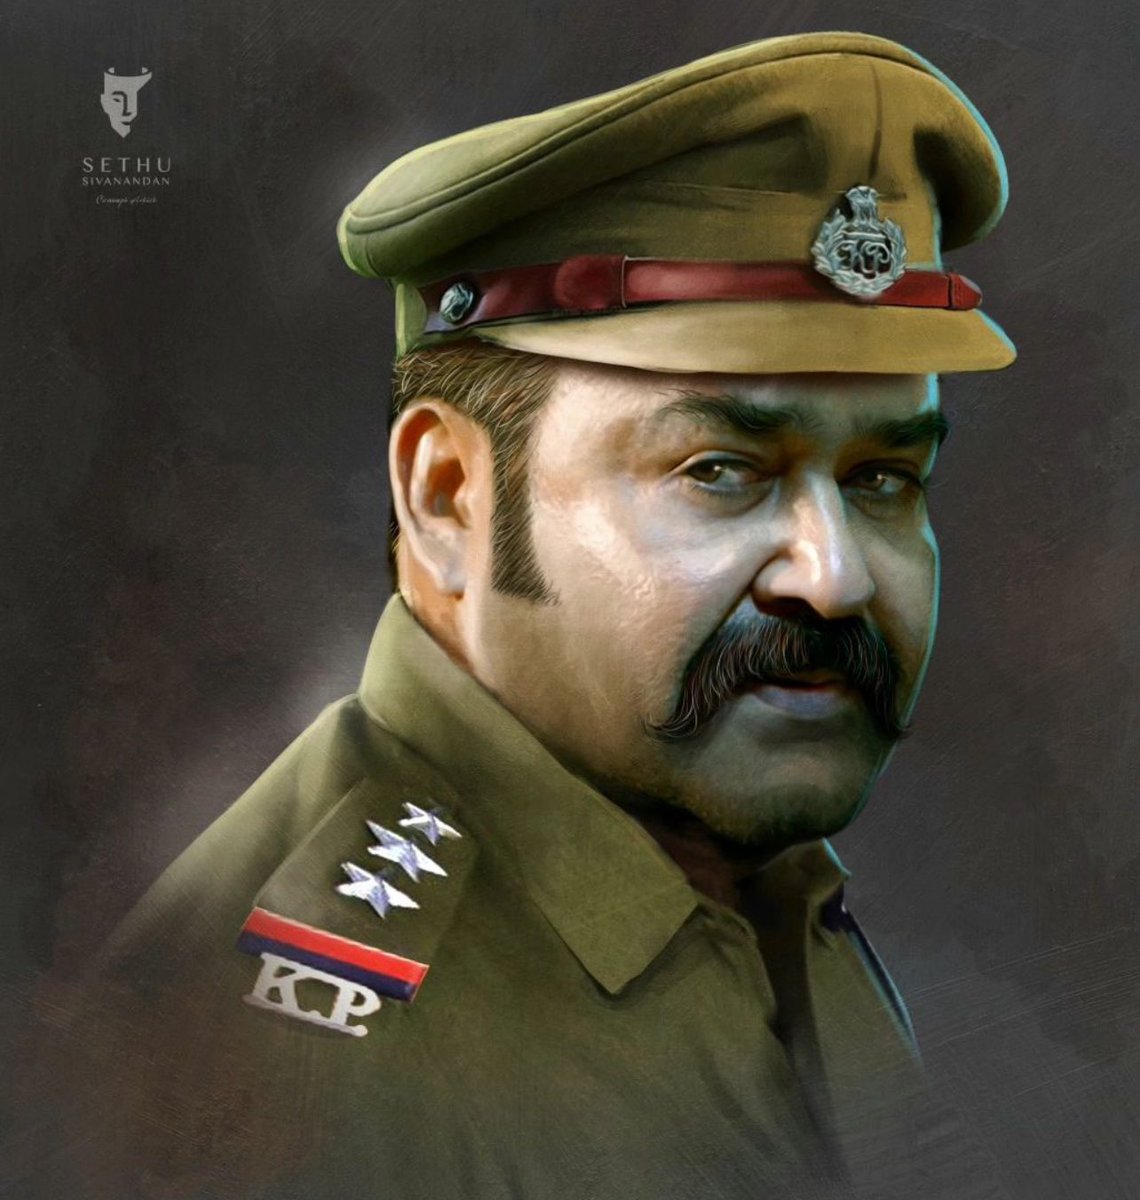 #grandmaster #mohanlal . First UTV production in mollywood , first Malayalam movie in Netflix. One of the best from B unni and deepak dev. Missing a cop role of lalettan. His current fitness is apt for an action cop film hope someone will do it